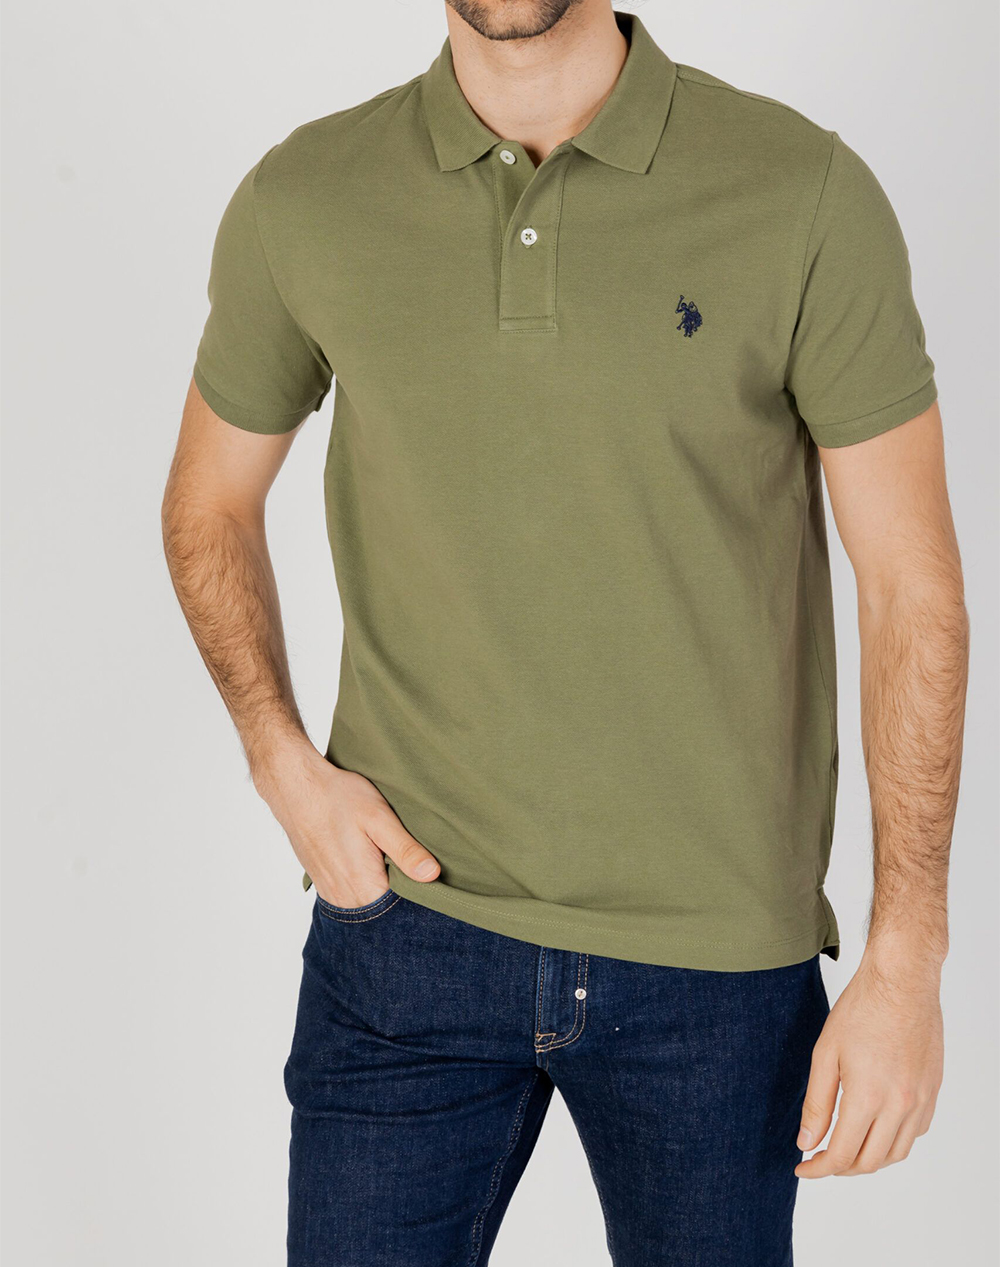 US POLO ASSN KING 41029 EHPD POLO PACK OF 400 ΜΠΛΟΥΖΑ ΑΝΔΡΙΚΟ 6735541029P400-314 Olive